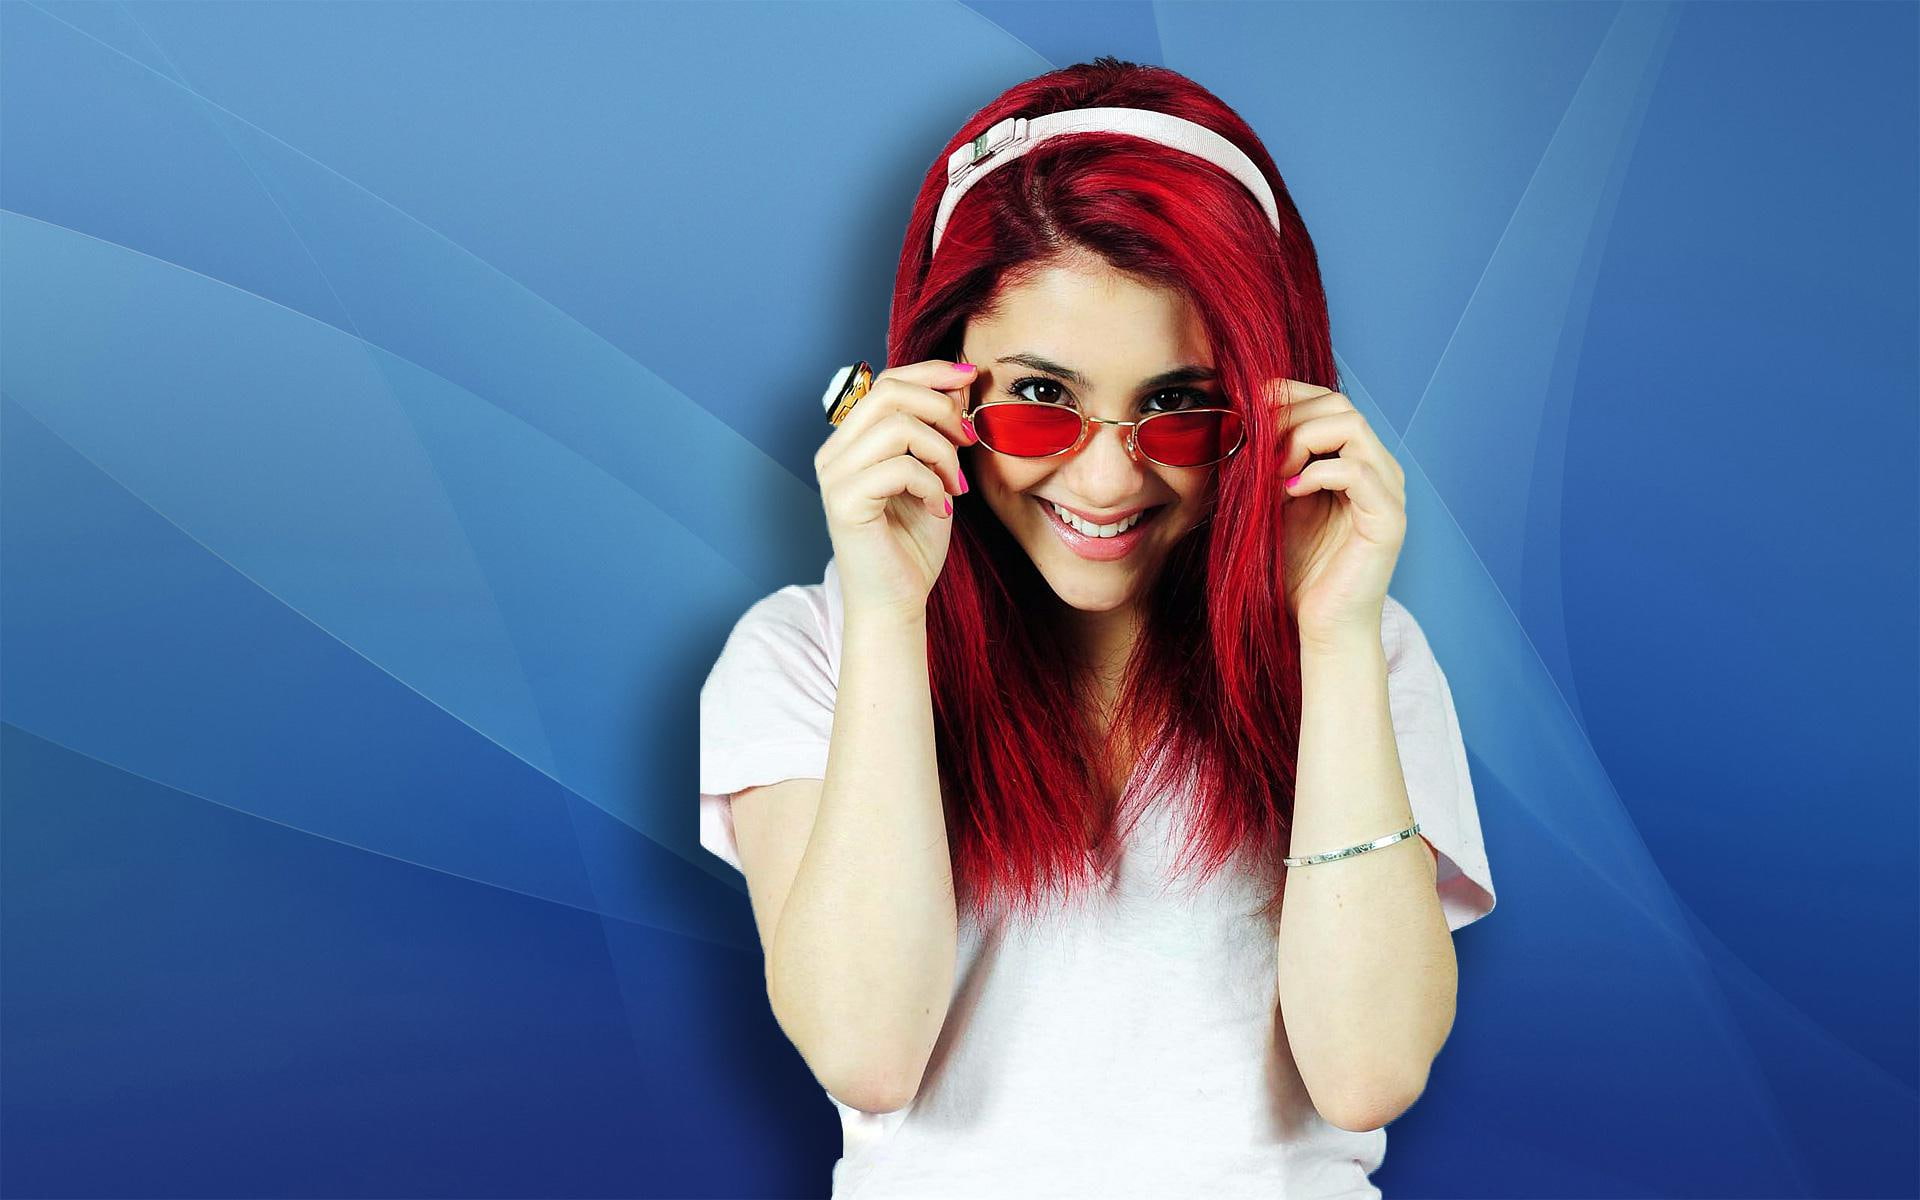 Ariana Grande Wearing Sunglasses, red long hair colot, celebrity